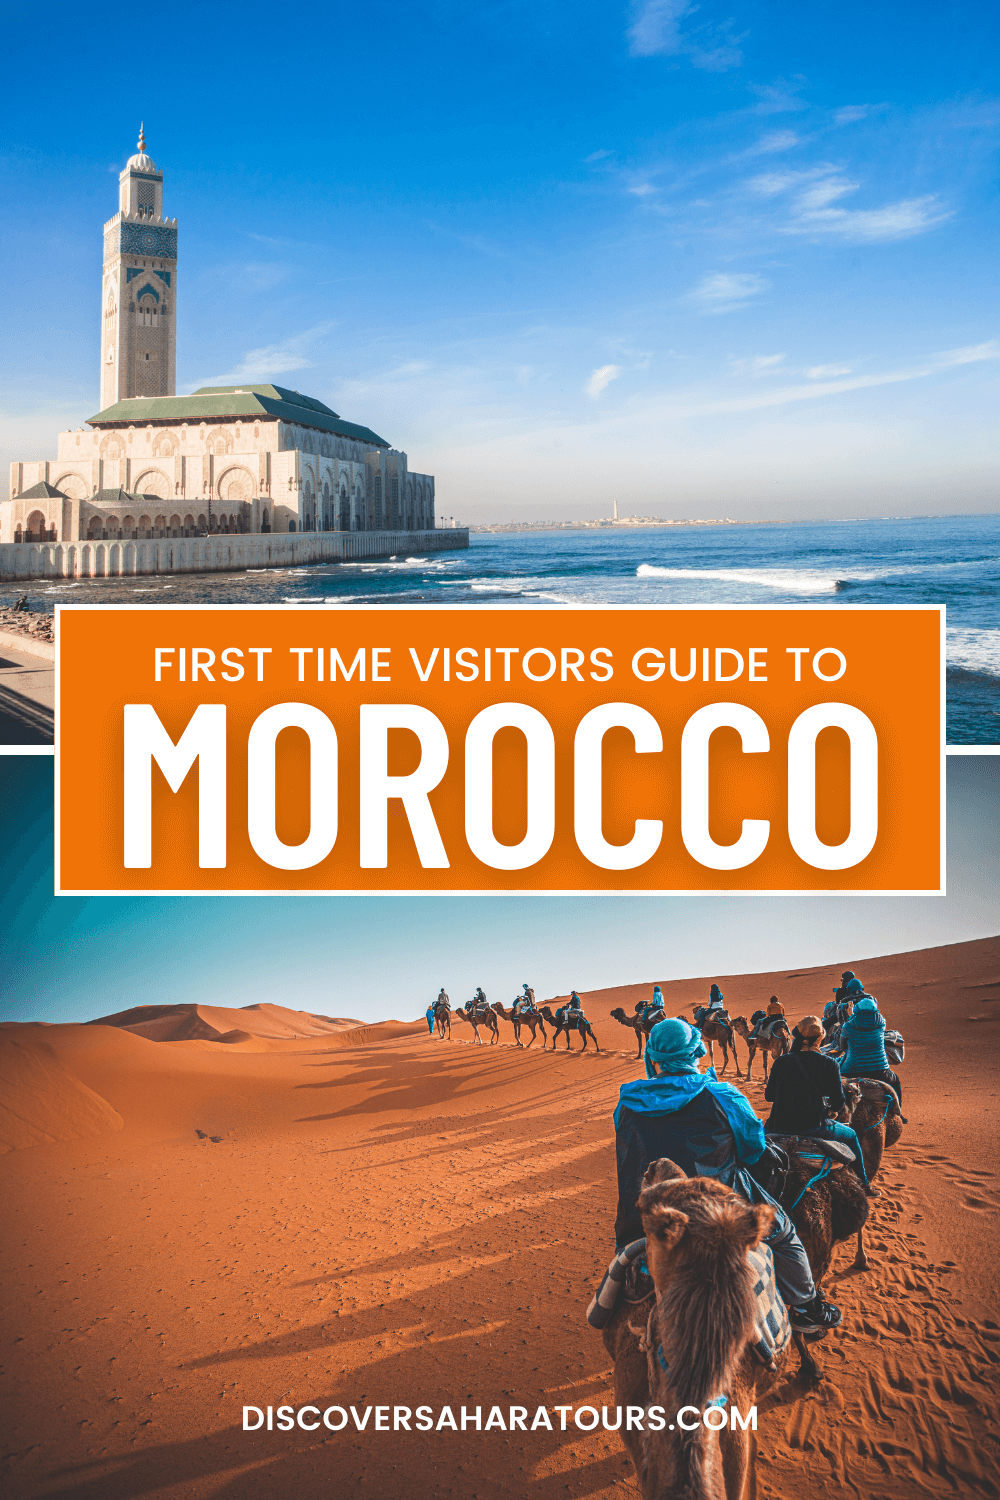 Featured image for “First Time Visitors Guide to Morocco”